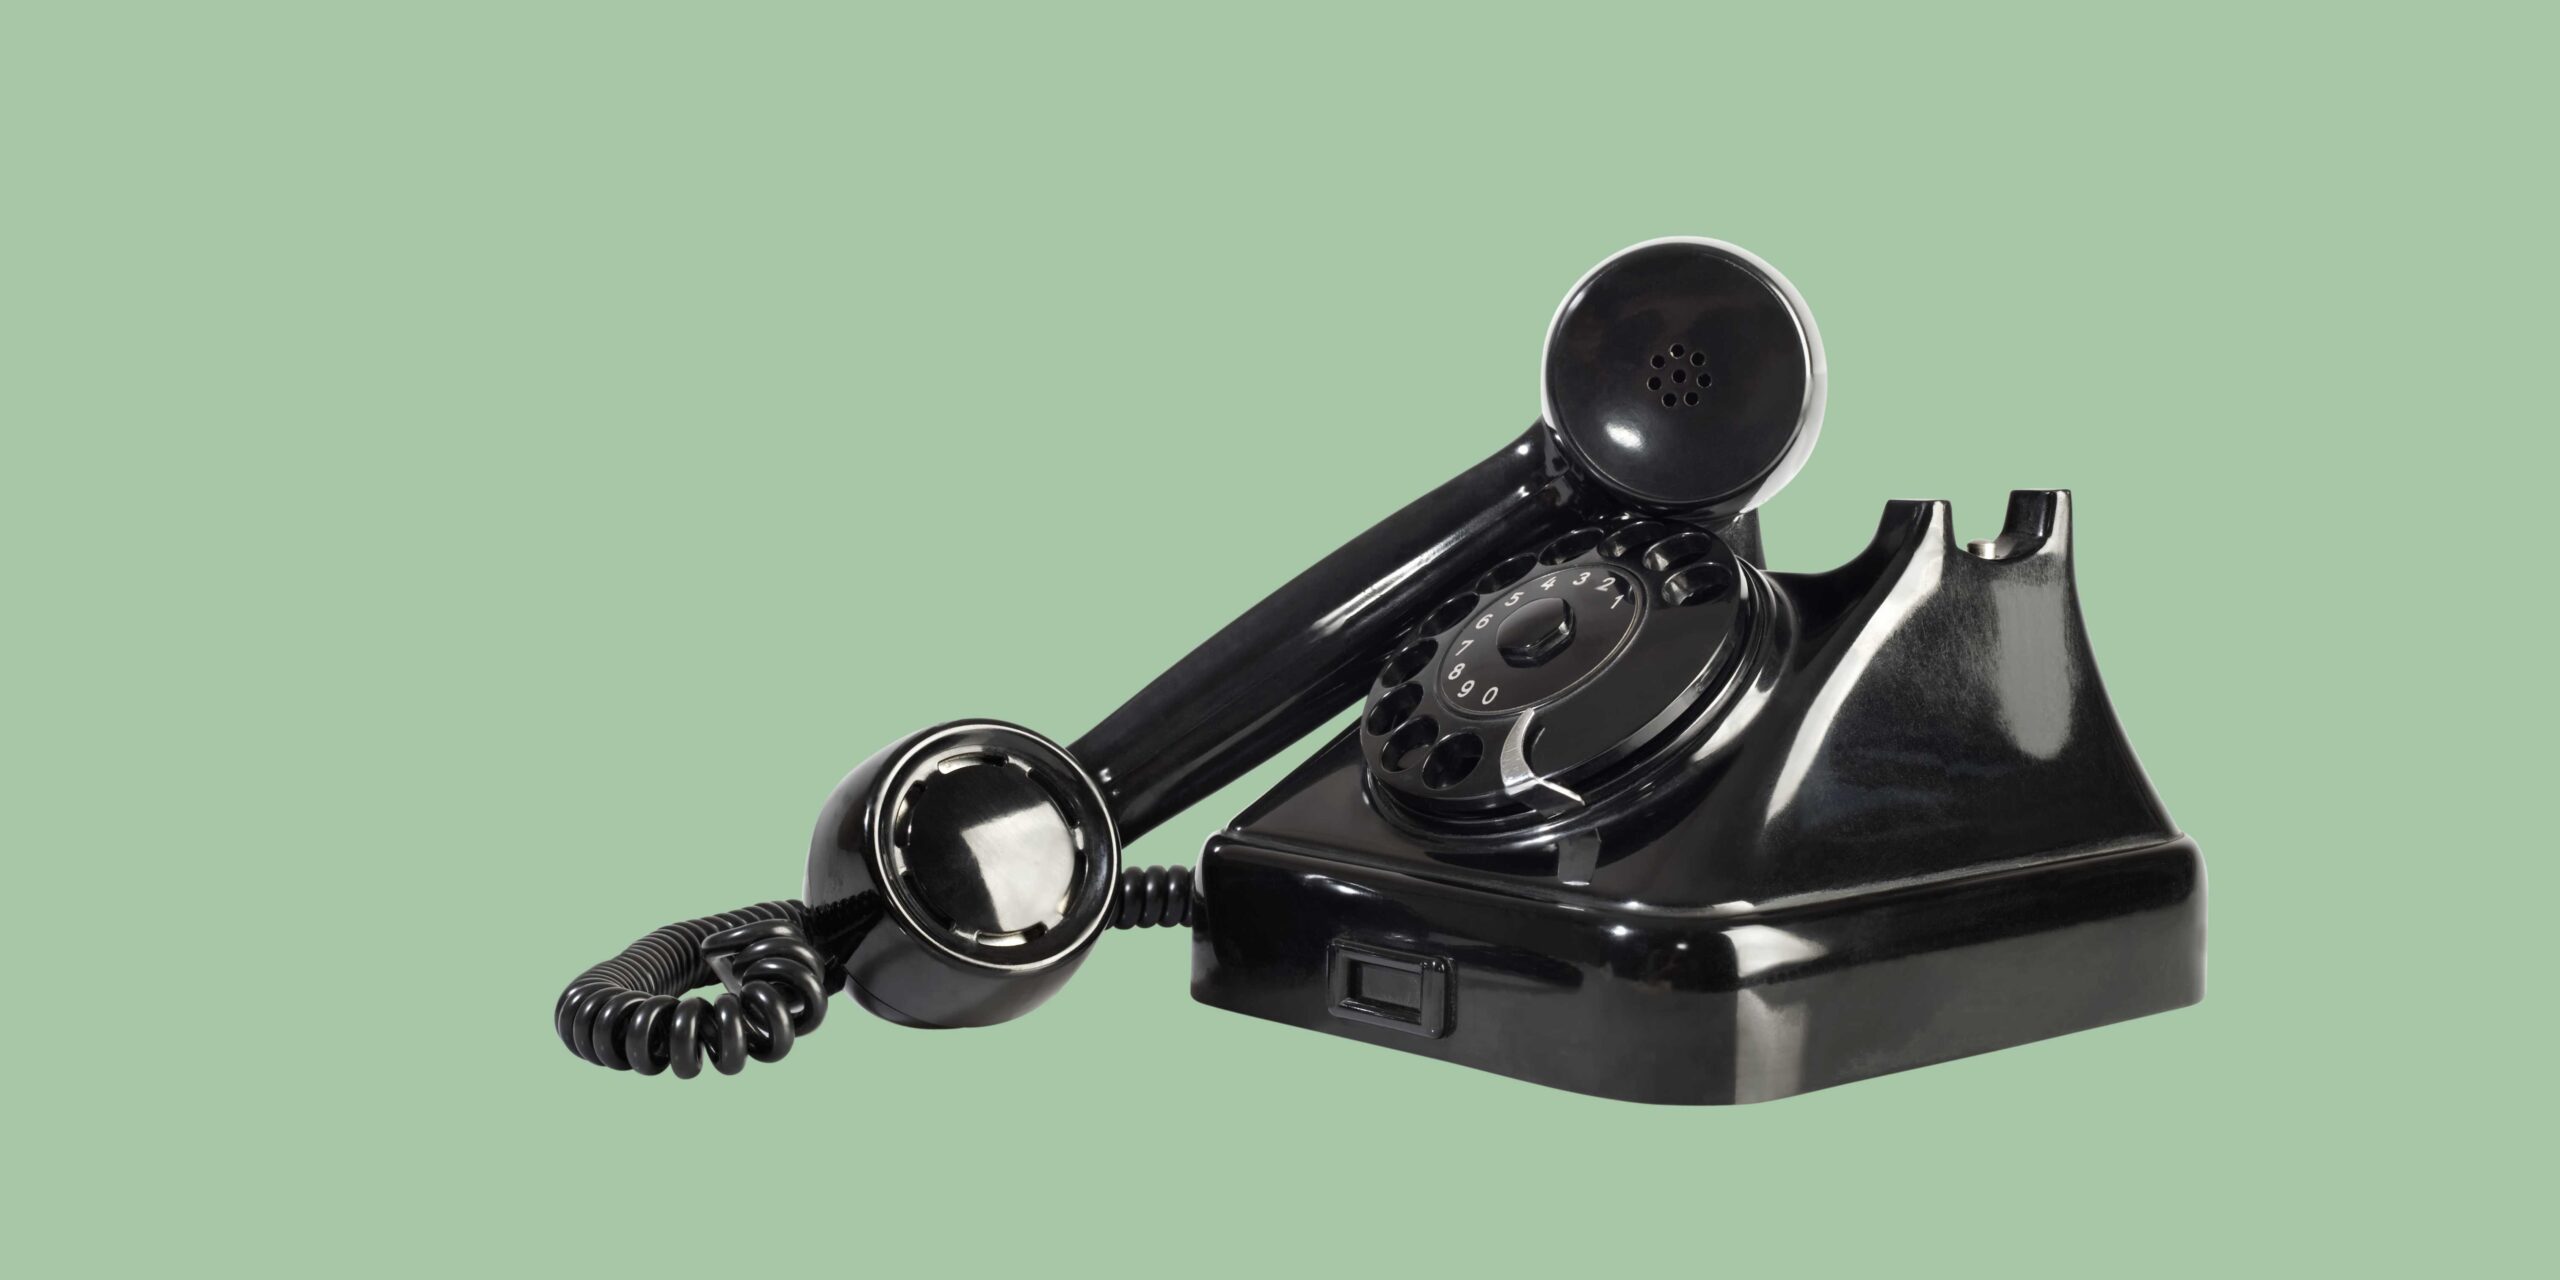 Traditional telephone